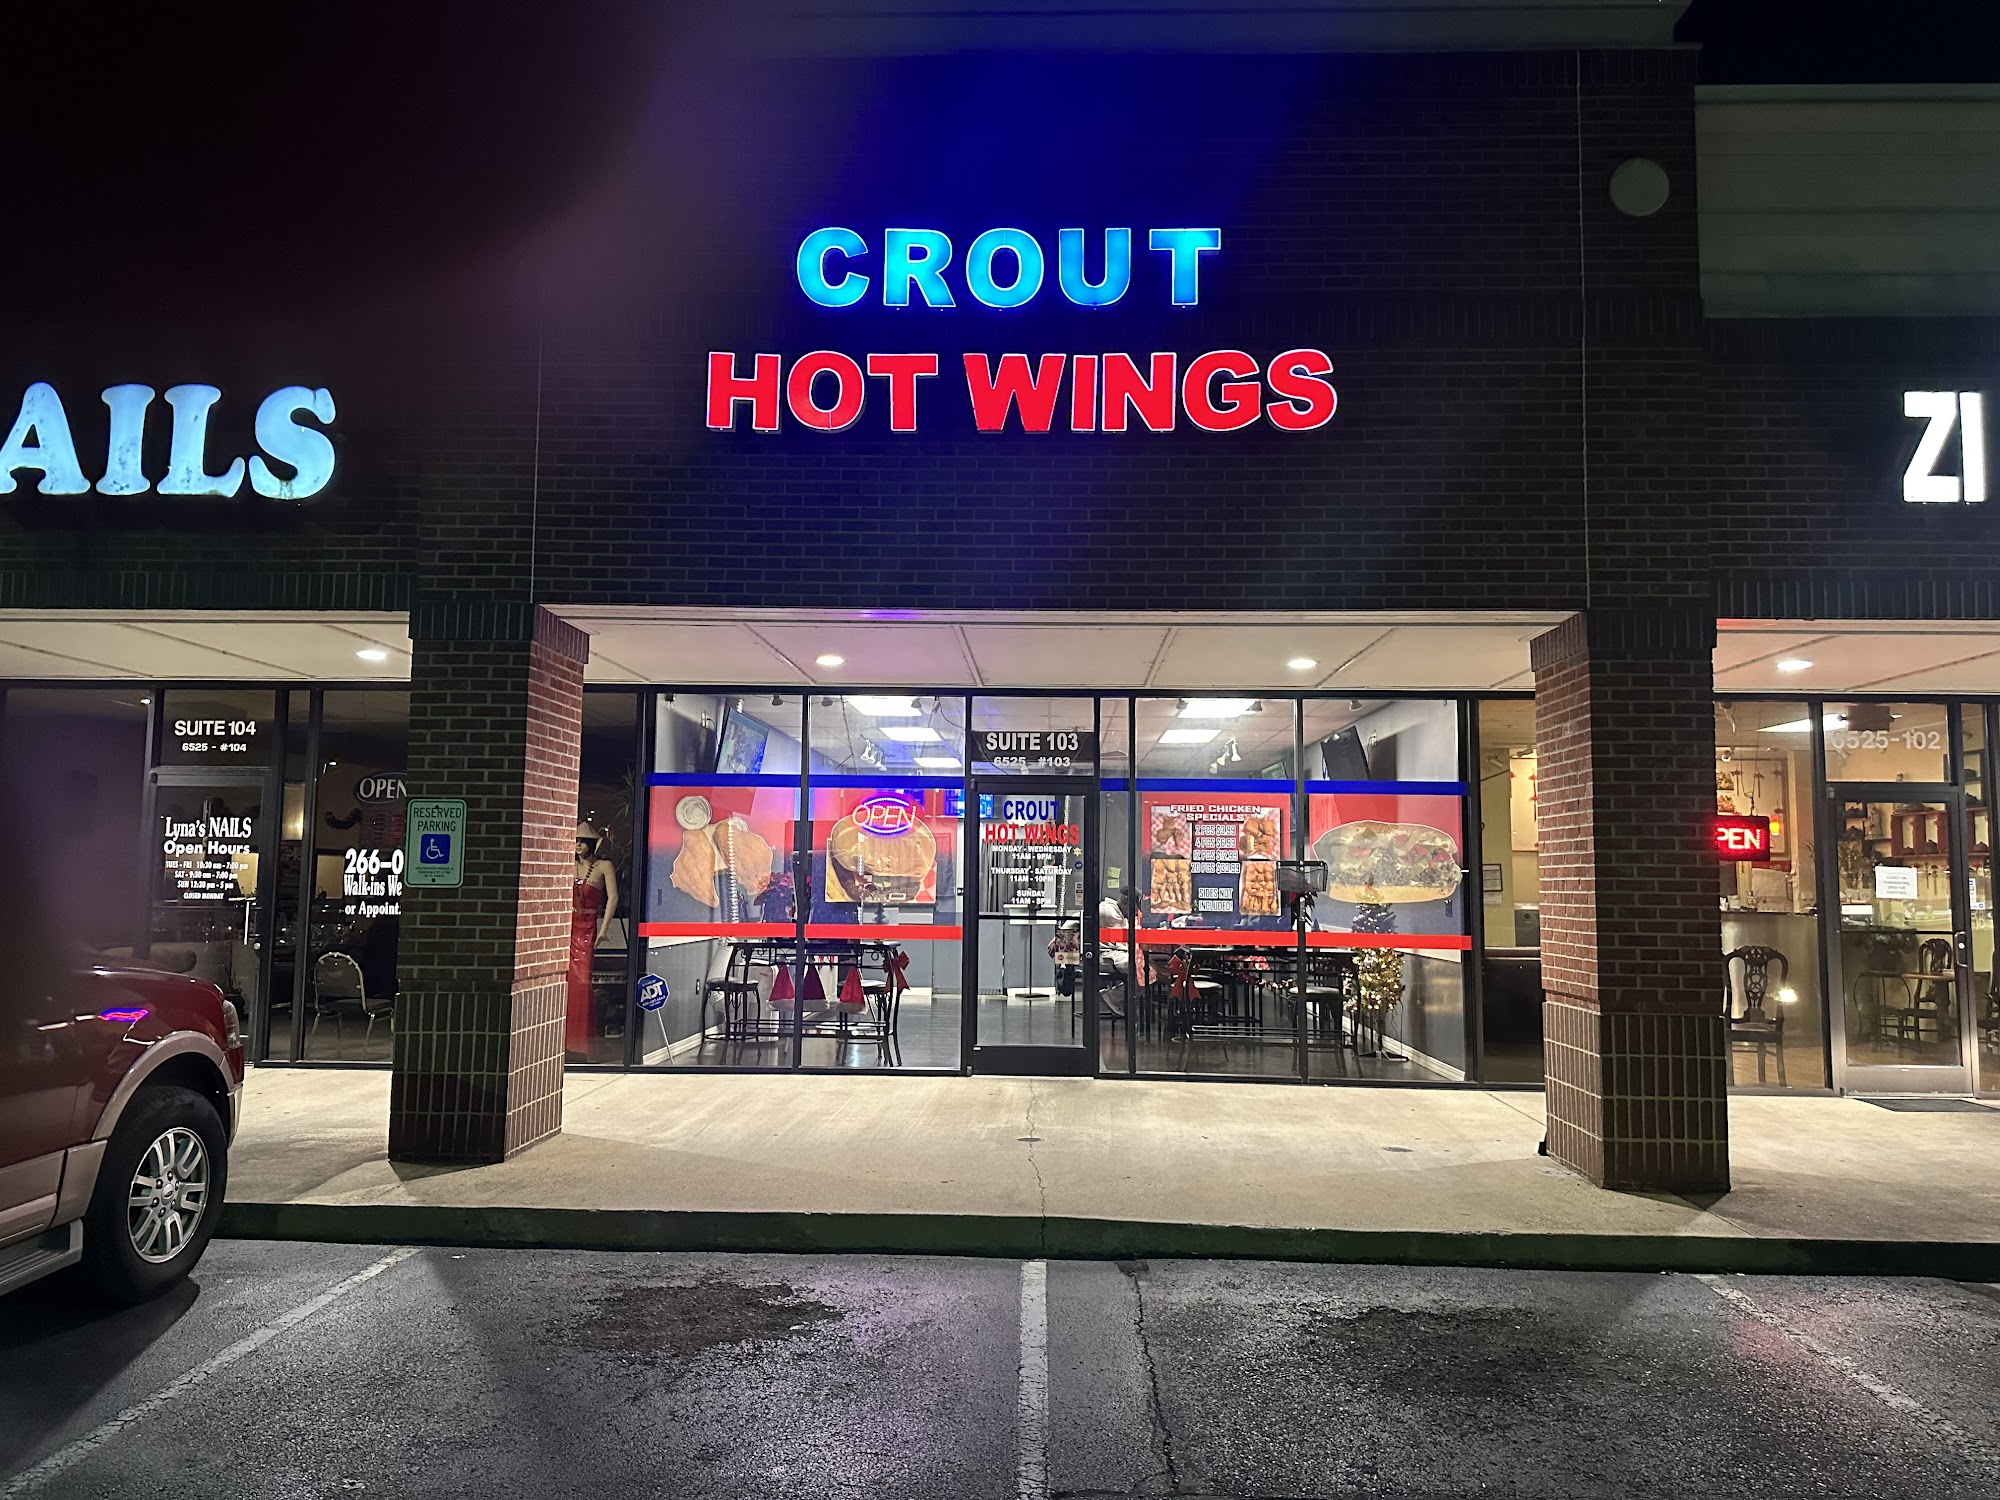 Crout Hot Wings